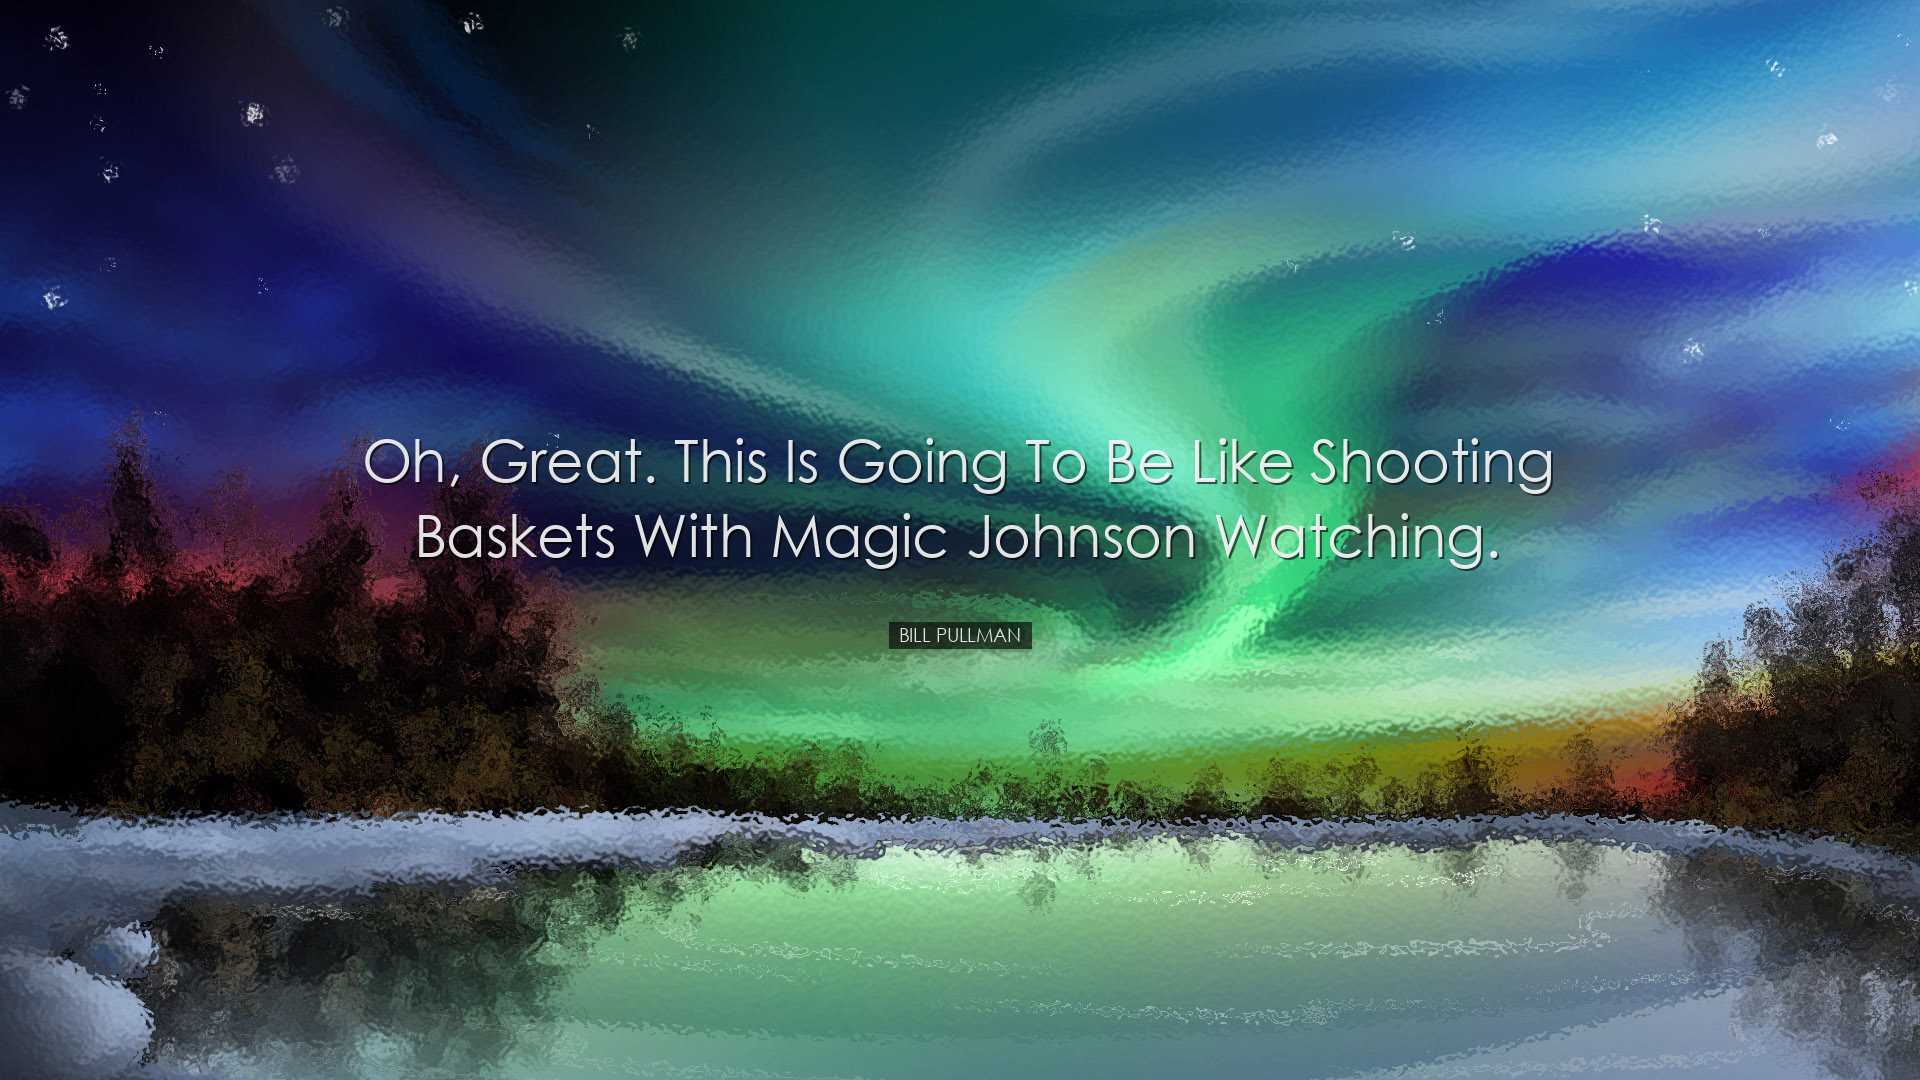 Oh, great. This is going to be like shooting baskets with Magic Jo